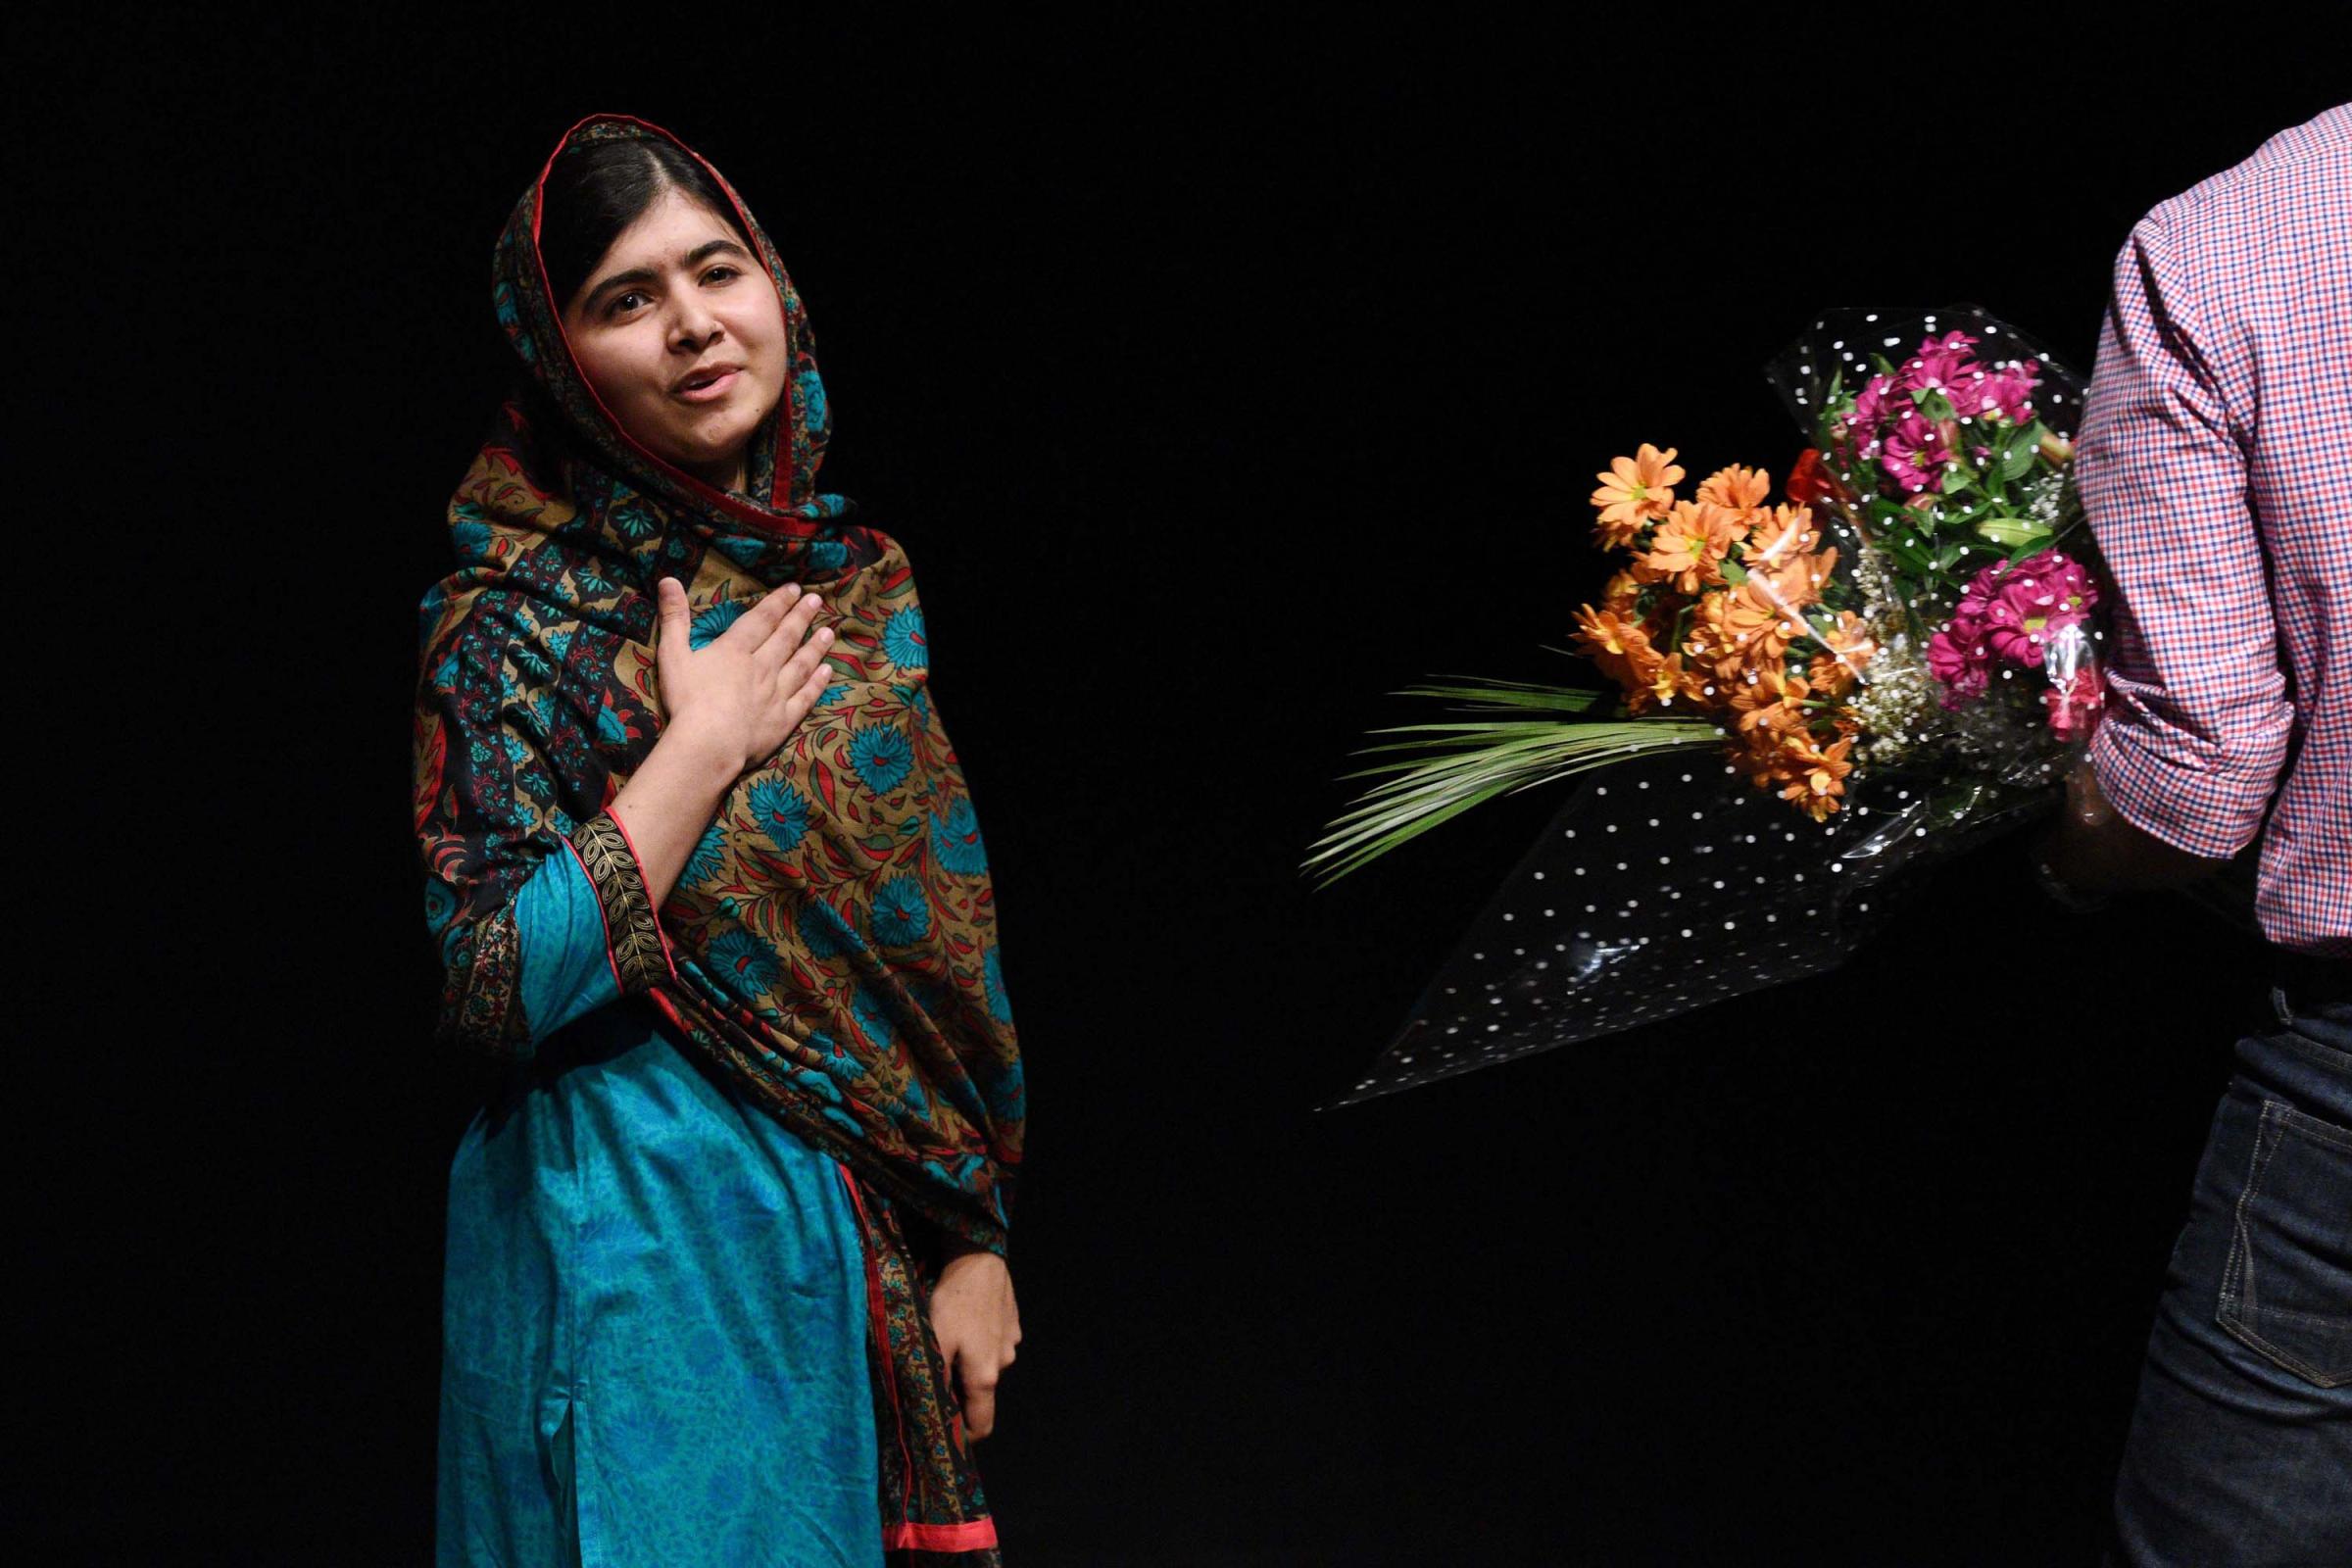 The Nobel Peace Prize went to 17-year-old Pakistani Malala Yousafzai and India's Kailash Satyarthi for their work promoting children's rights. Yousafzai gestures after addressing the media in Birmingham, central England on Oct. 10, 2014.